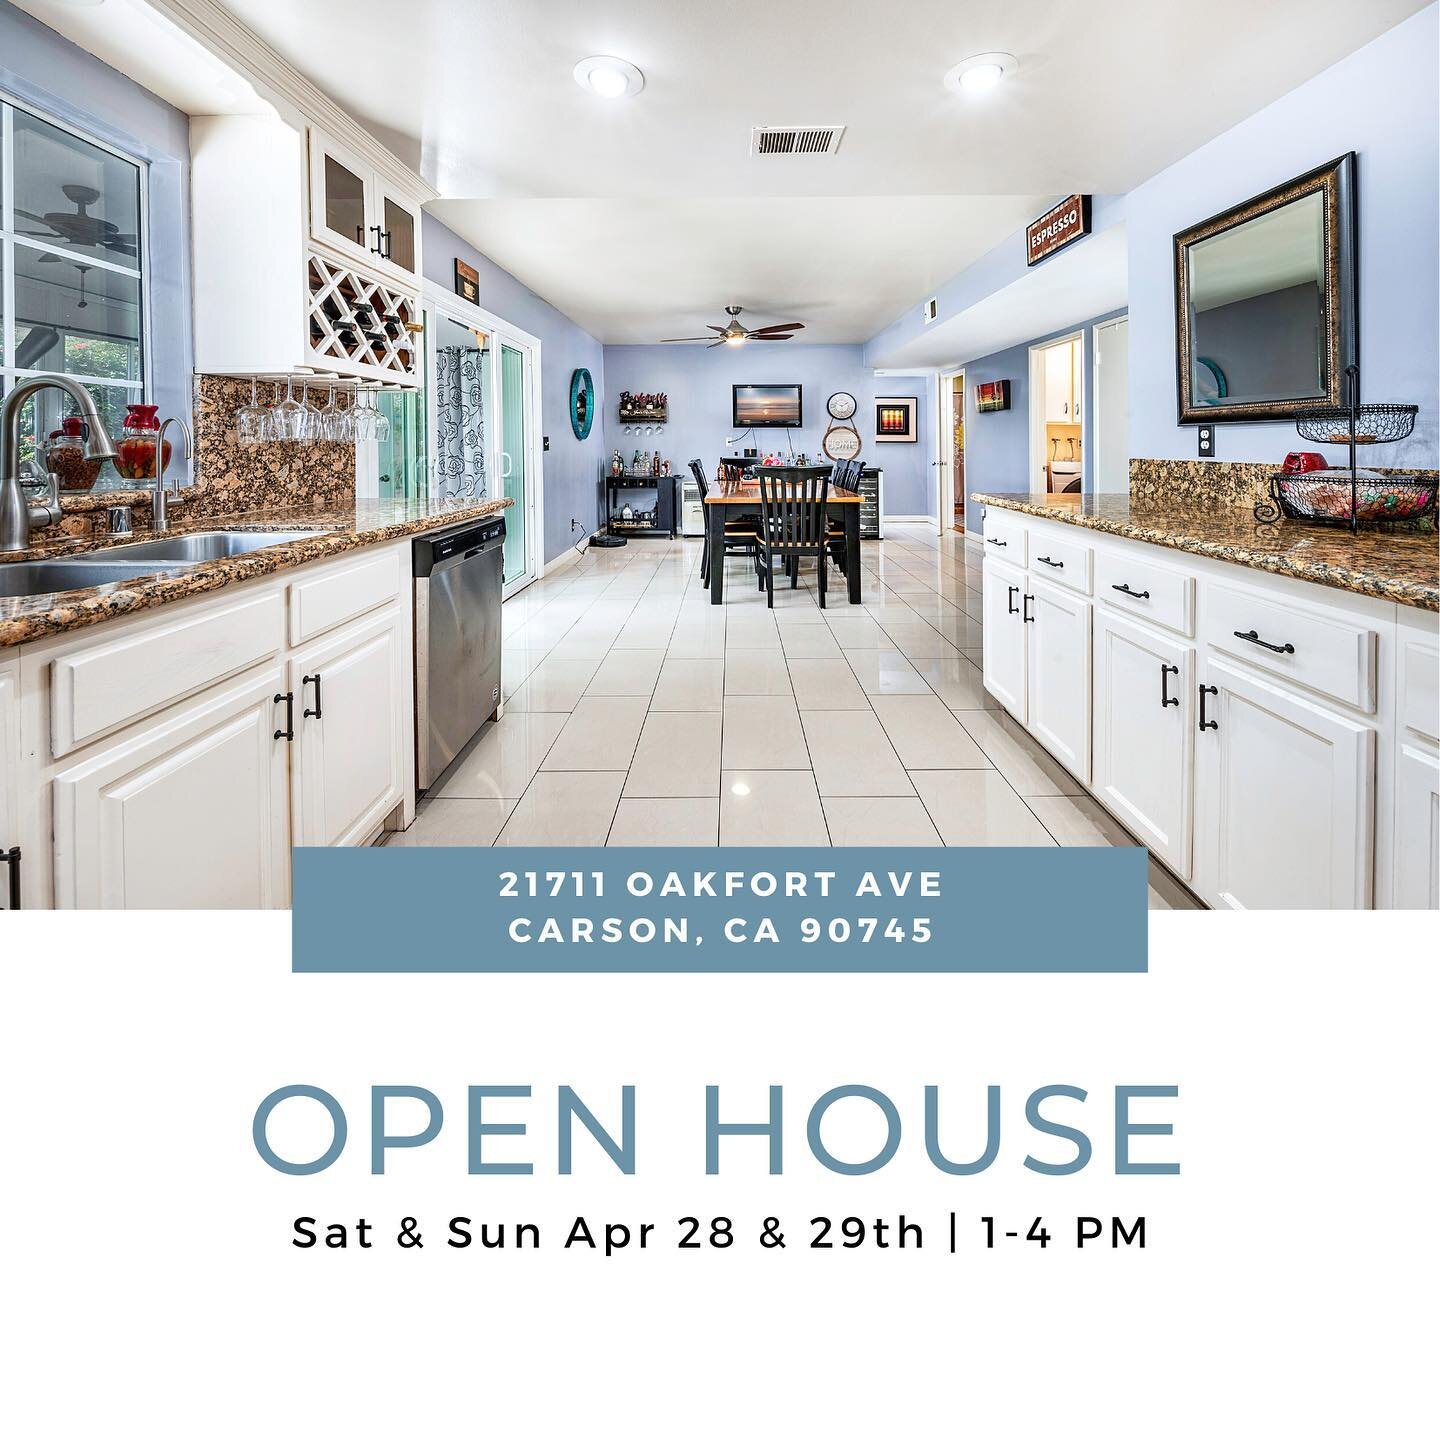 First Open House for our Oakfort  listing is this weekend! 1-4 PM both Saturday and Sunday. Hope to see you there 
&bull;
&bull;
&bull;
&bull;
#listings #openhouse #realestate #newlisting #kellerwilliams #kwpe #carson #longbeach #beautifulhomes #fami